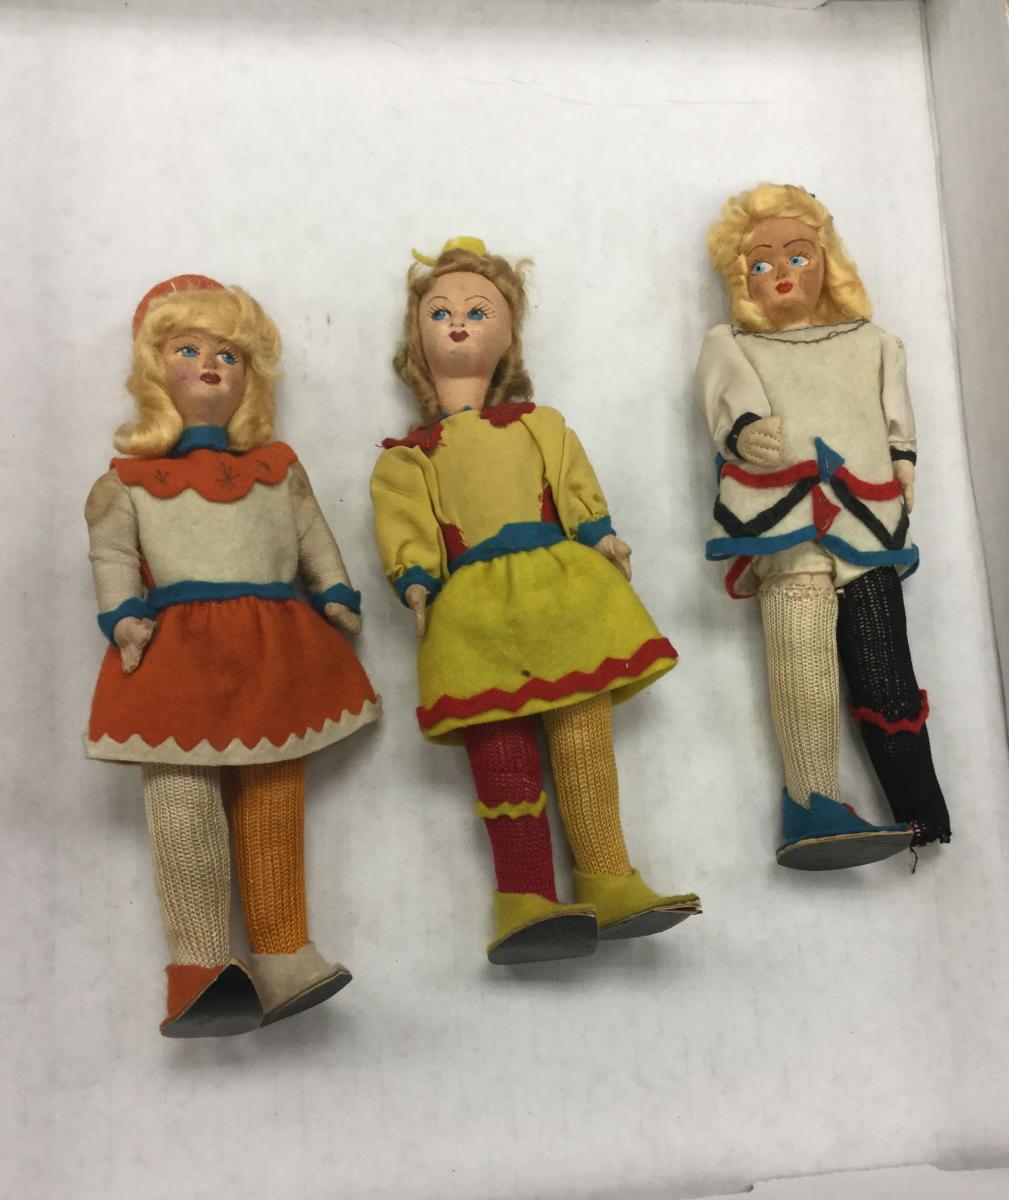 image of 3 dolls made by stateless Jewish children residing in a DP camp near Florence, Italy, known as “Kibbutz HaOved”, with help from funds provided by the Joint Distribution Committee